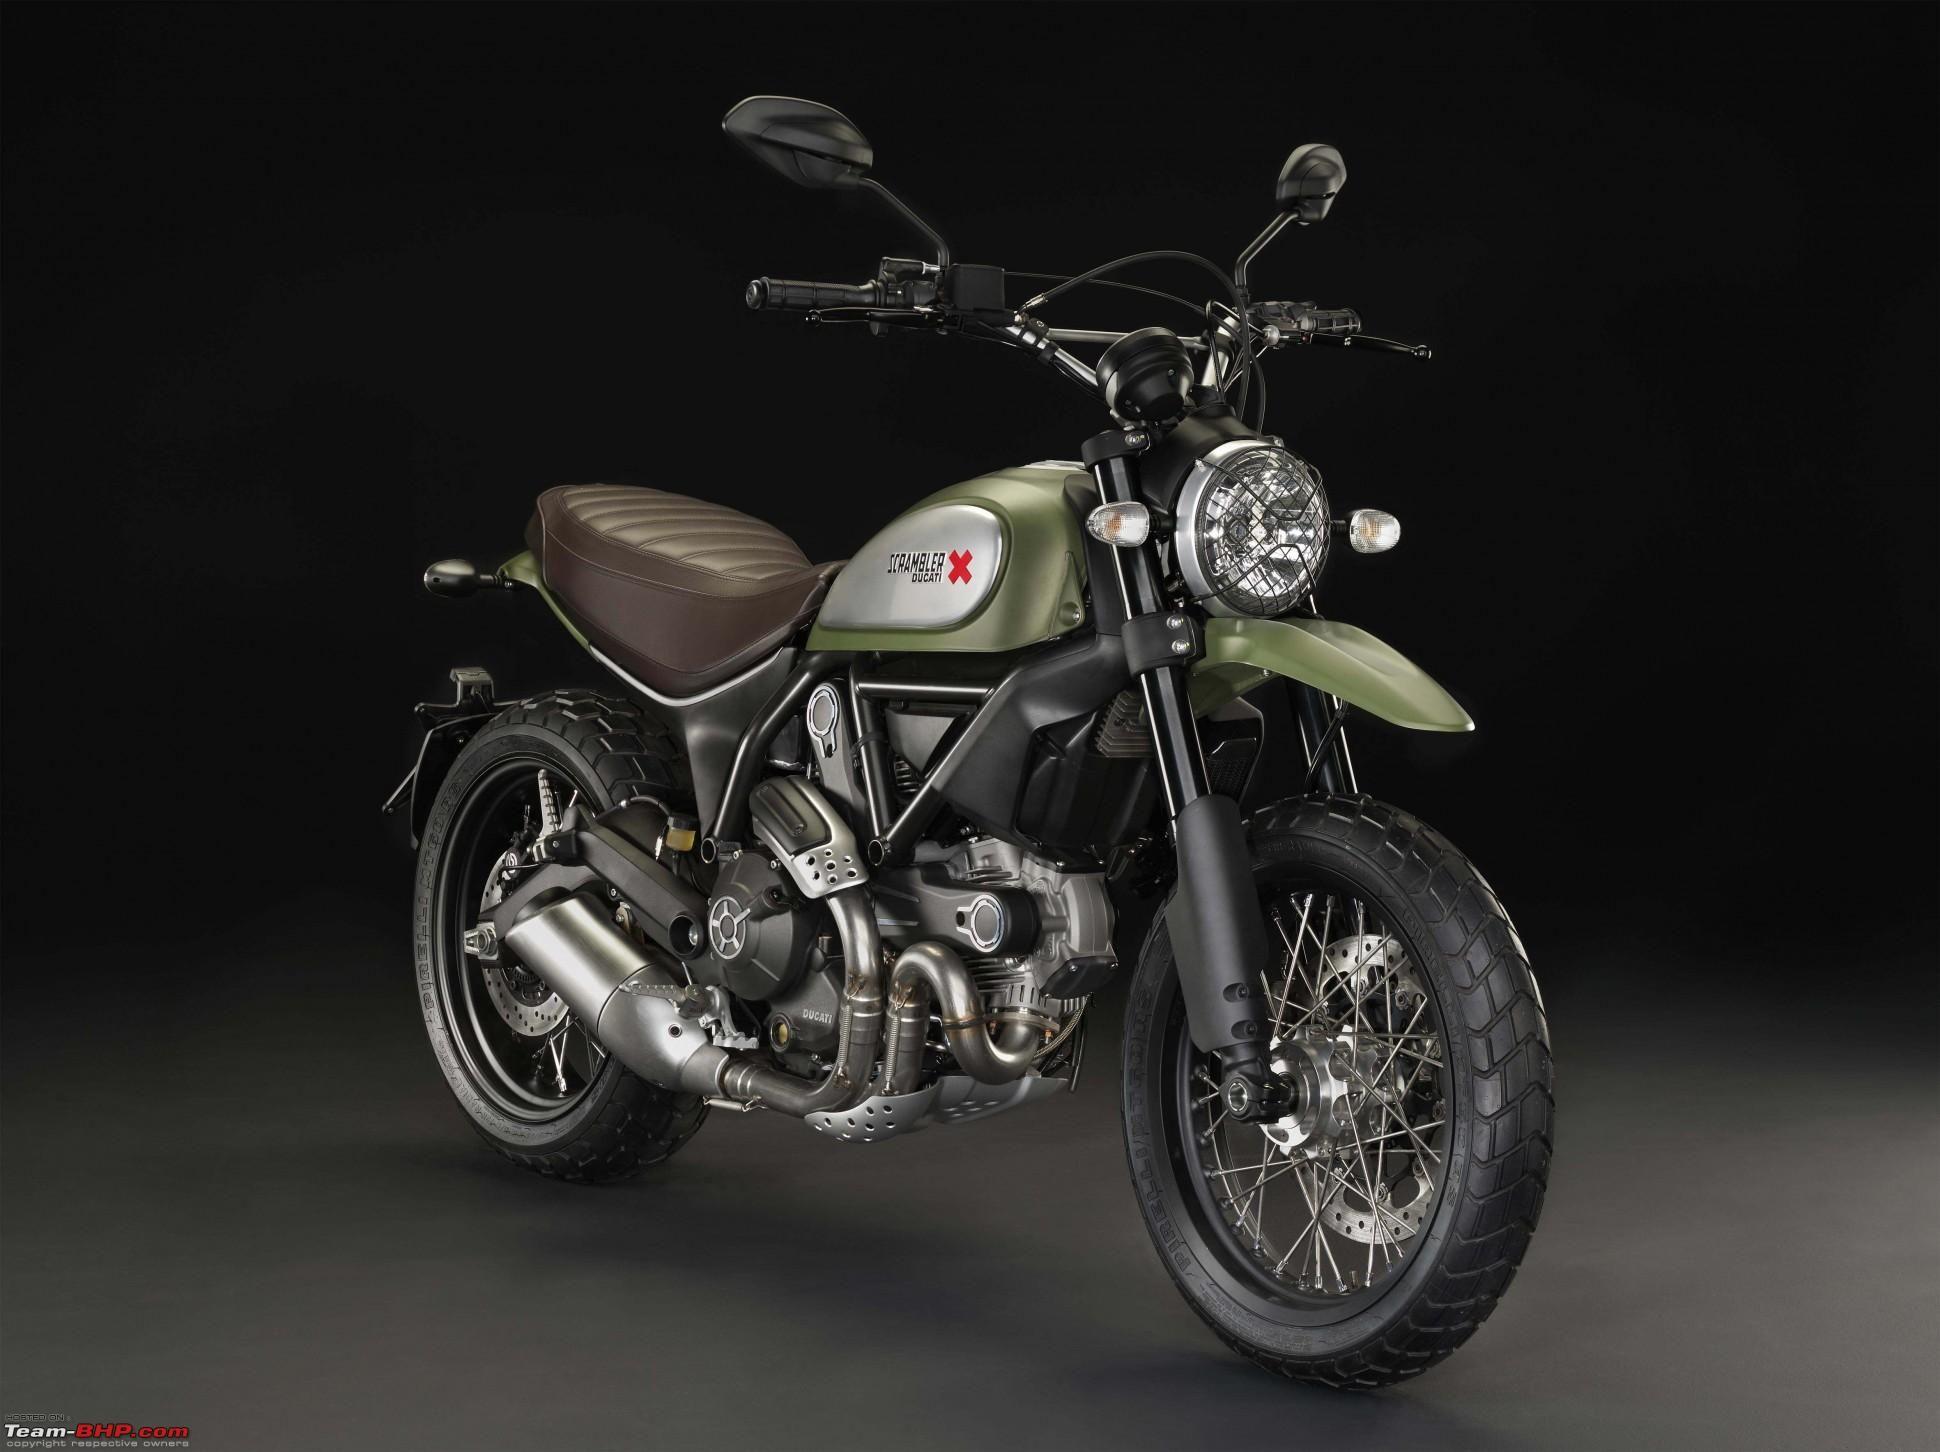 The Royal Enfield Himalayan, now launched!